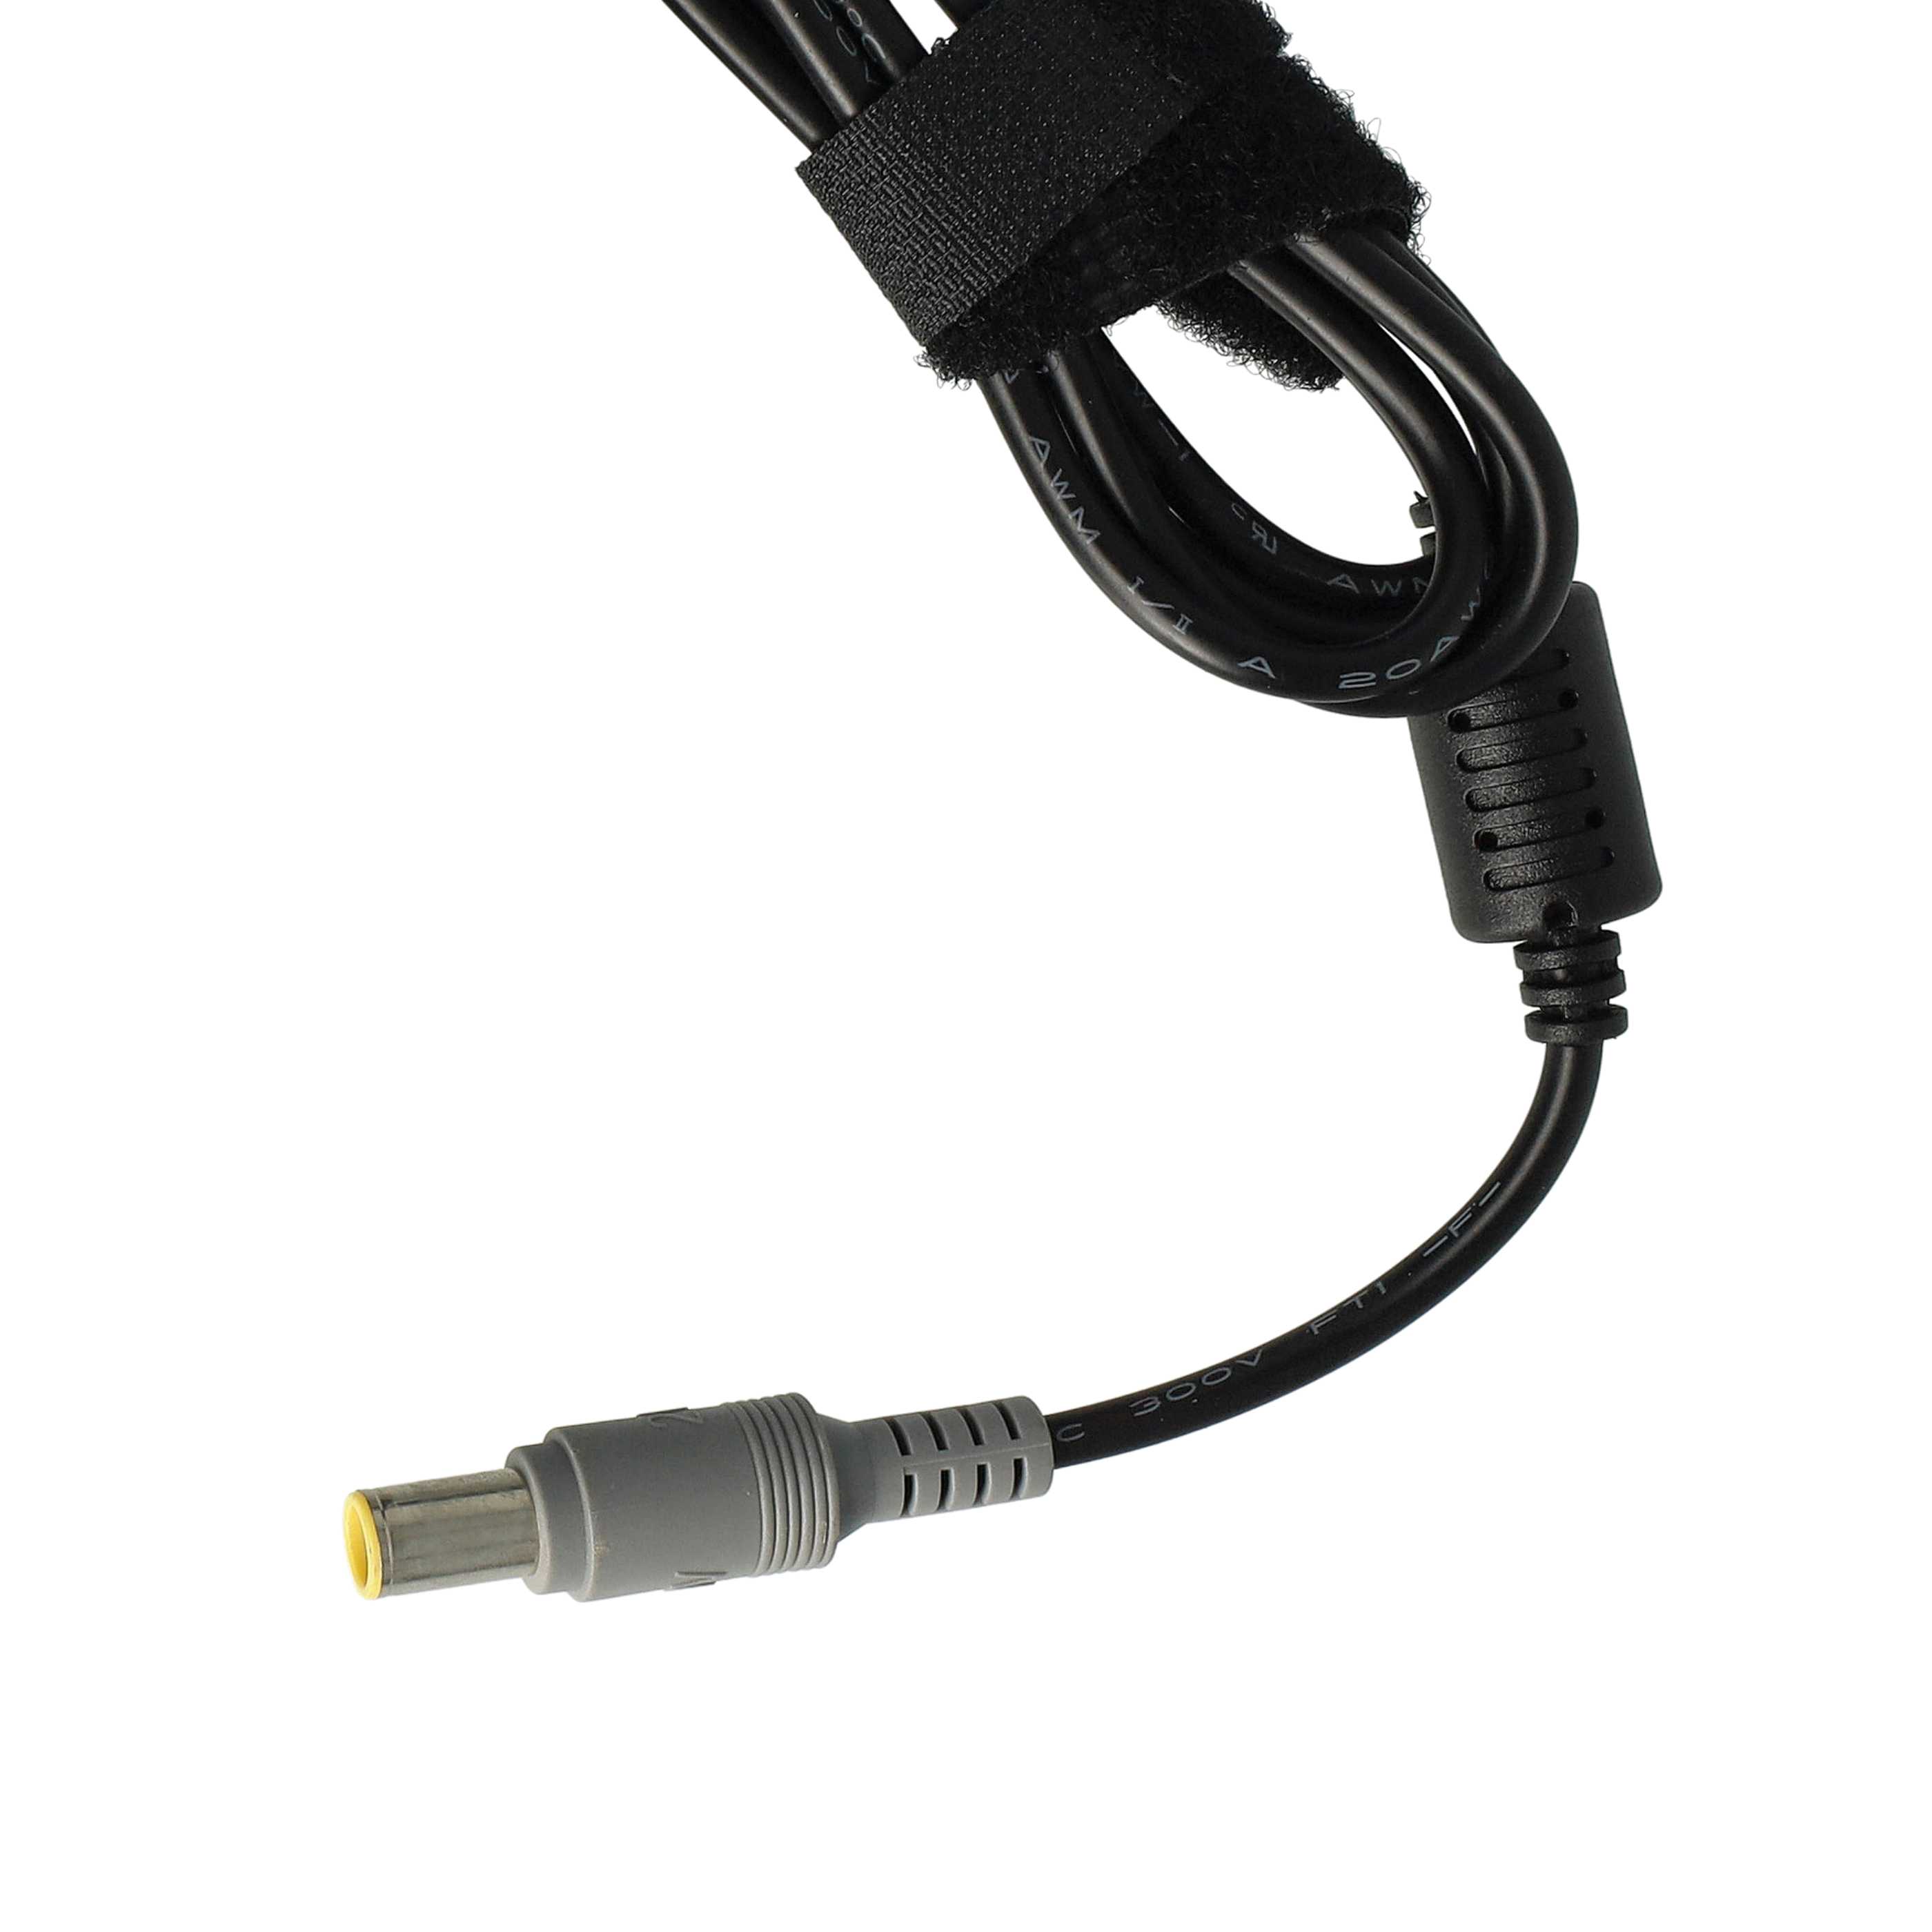 Vehicle Charger replaces IBM 41N8460 for Notebook - 4.5 A